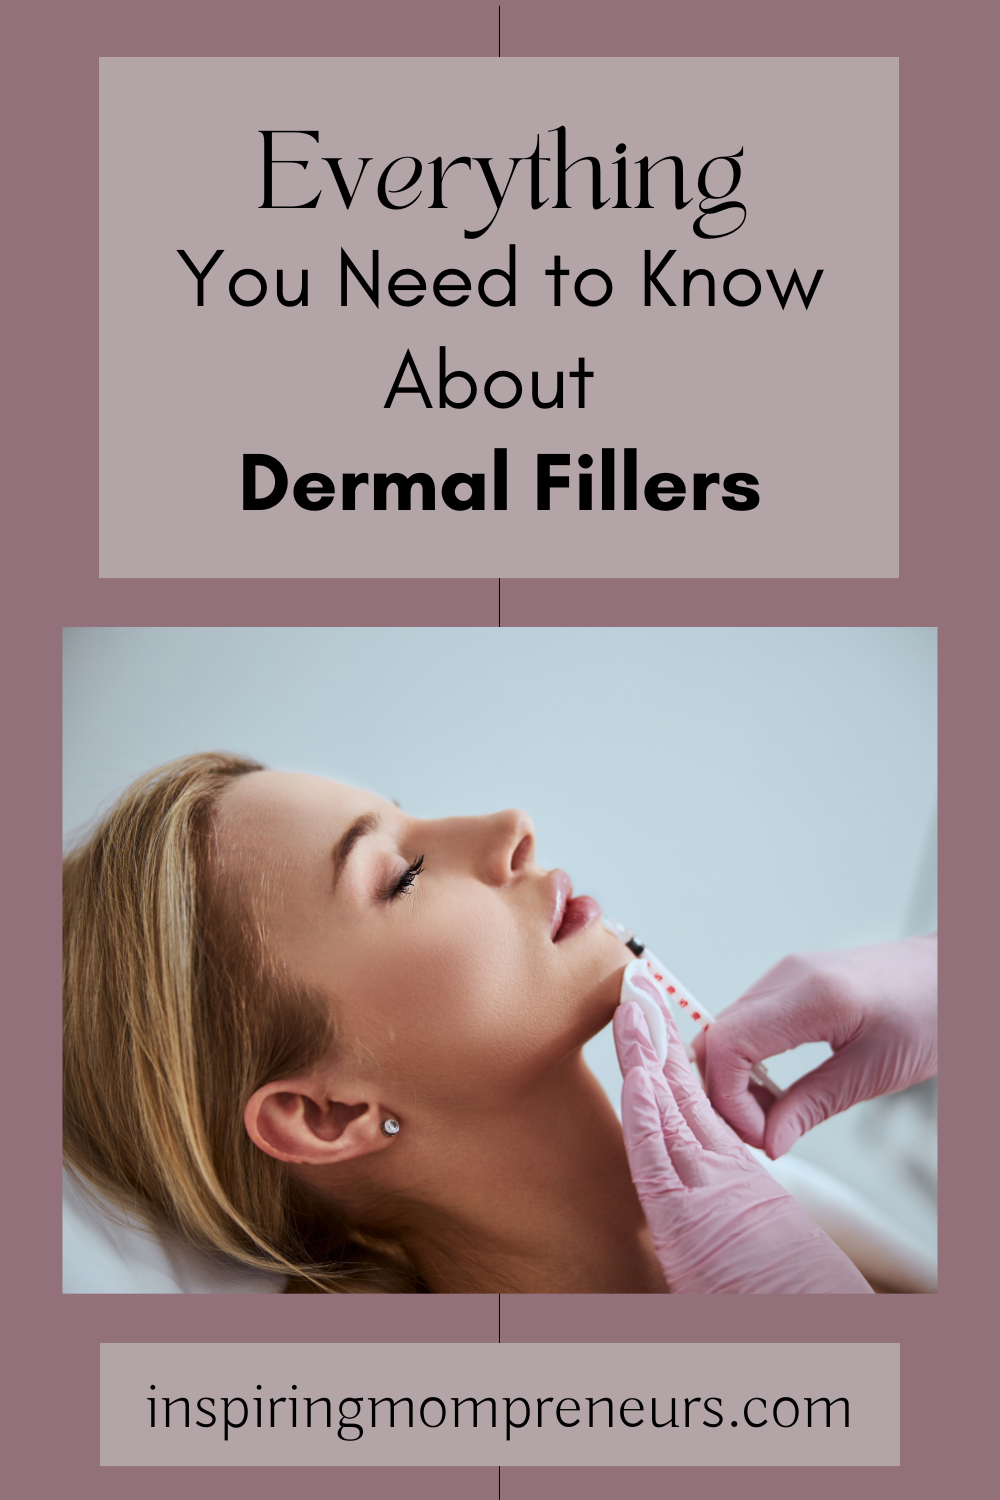 Dermal fillers is an excellent option for those looking to enhance their natural beauty. Here is everything you need to know about the procedure.